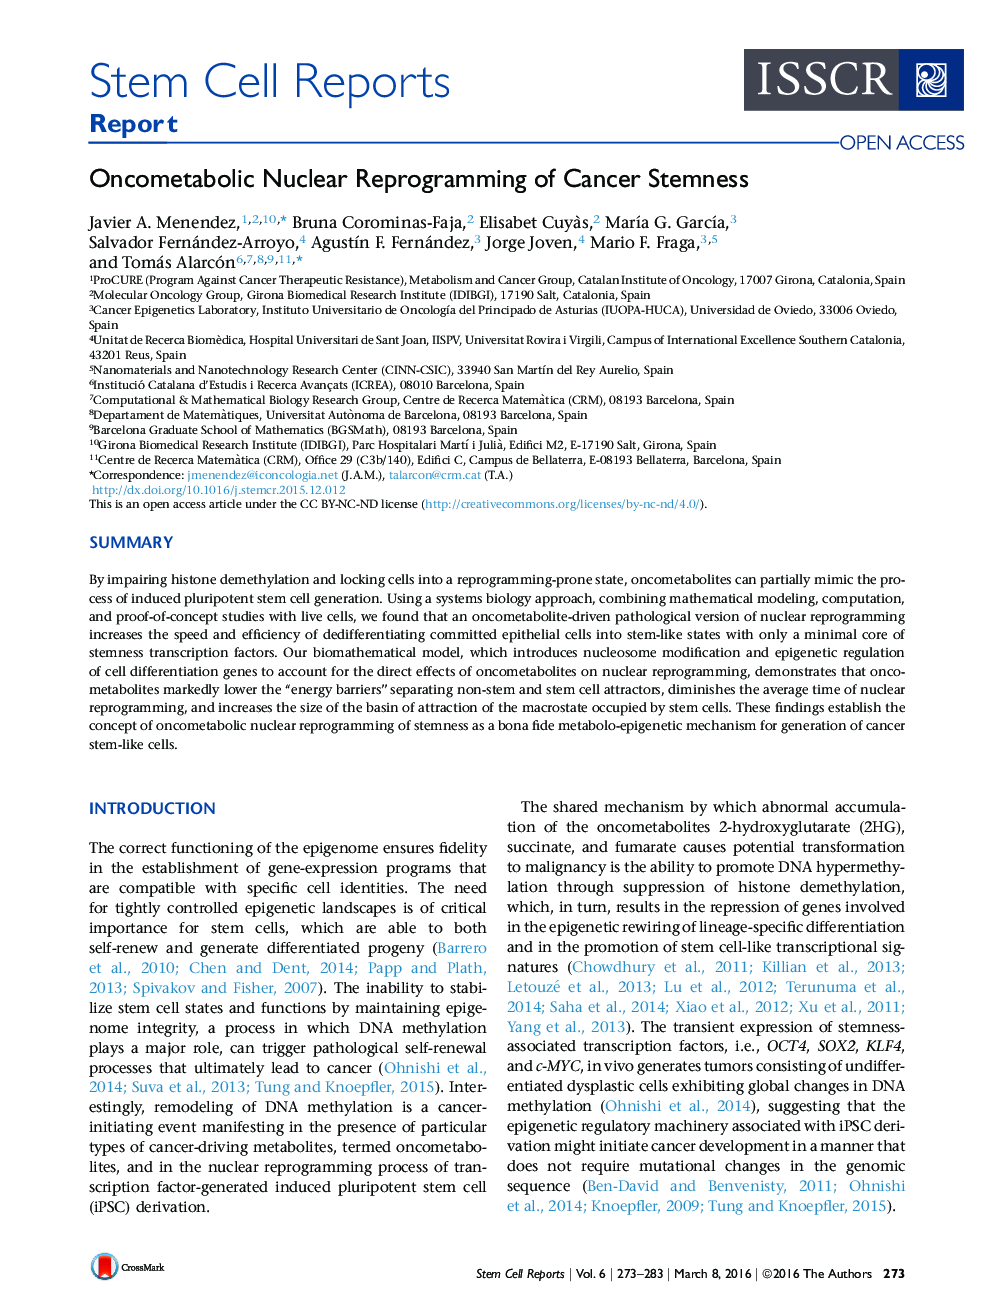 Oncometabolic Nuclear Reprogramming of Cancer Stemness 